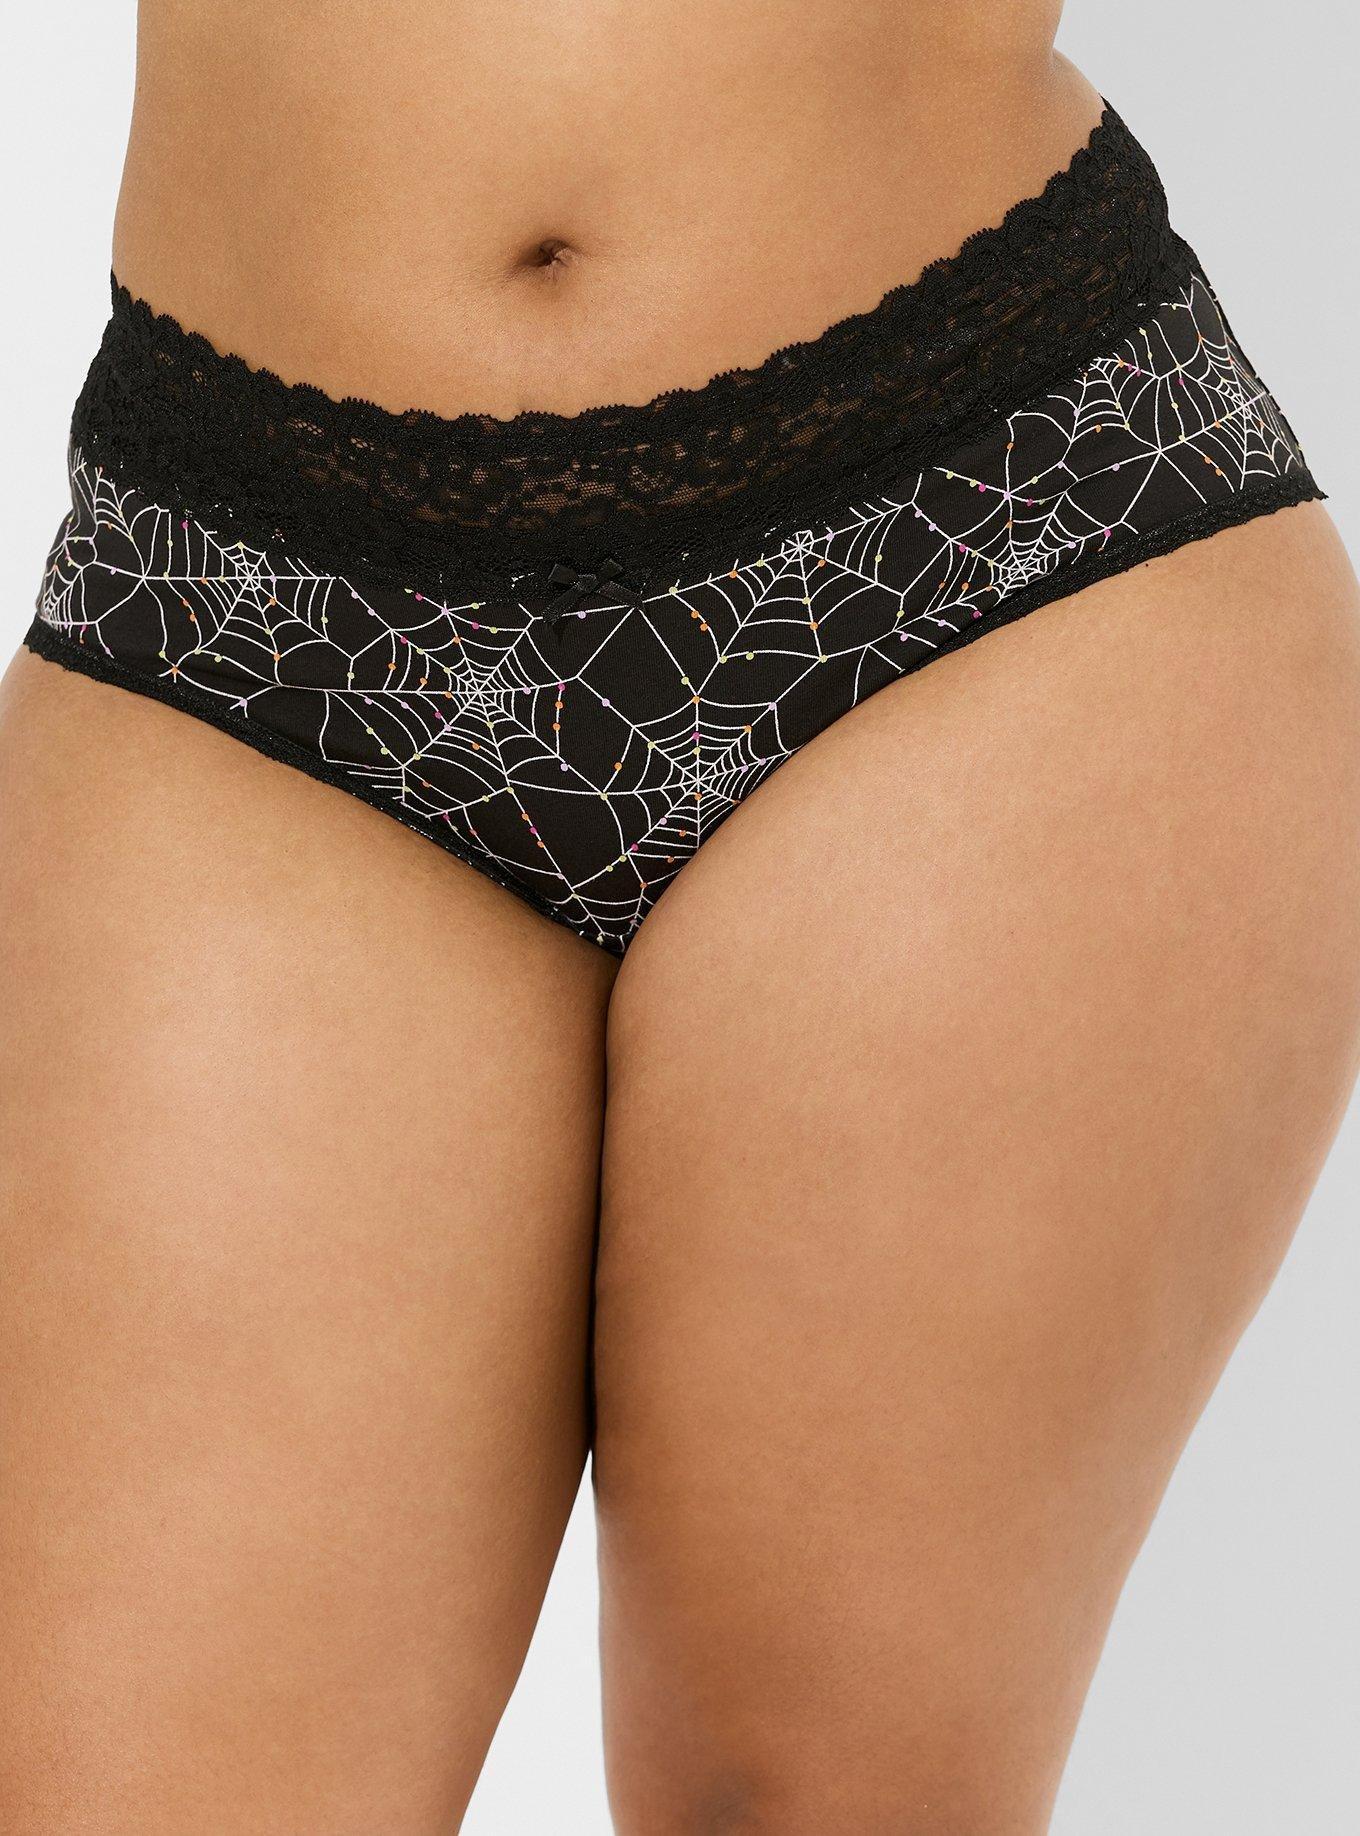 Cotton and Lace Trim Cheeky Panty - Black